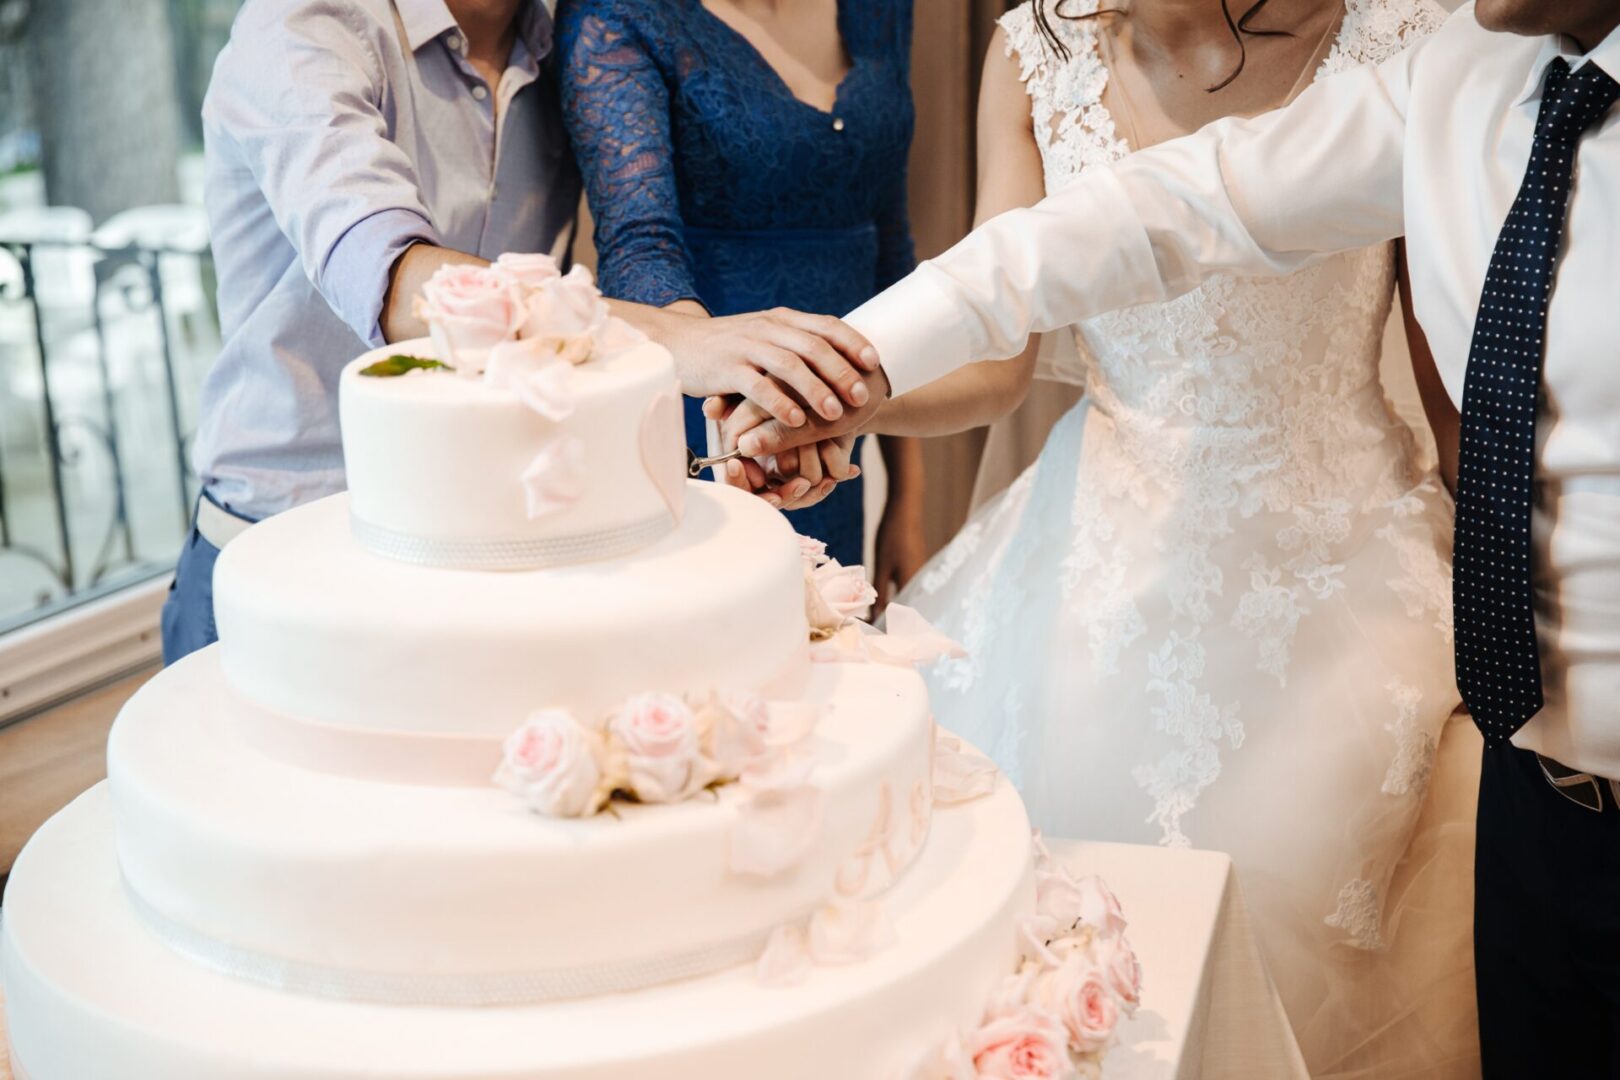 two people cutting a big cake with bride and groom